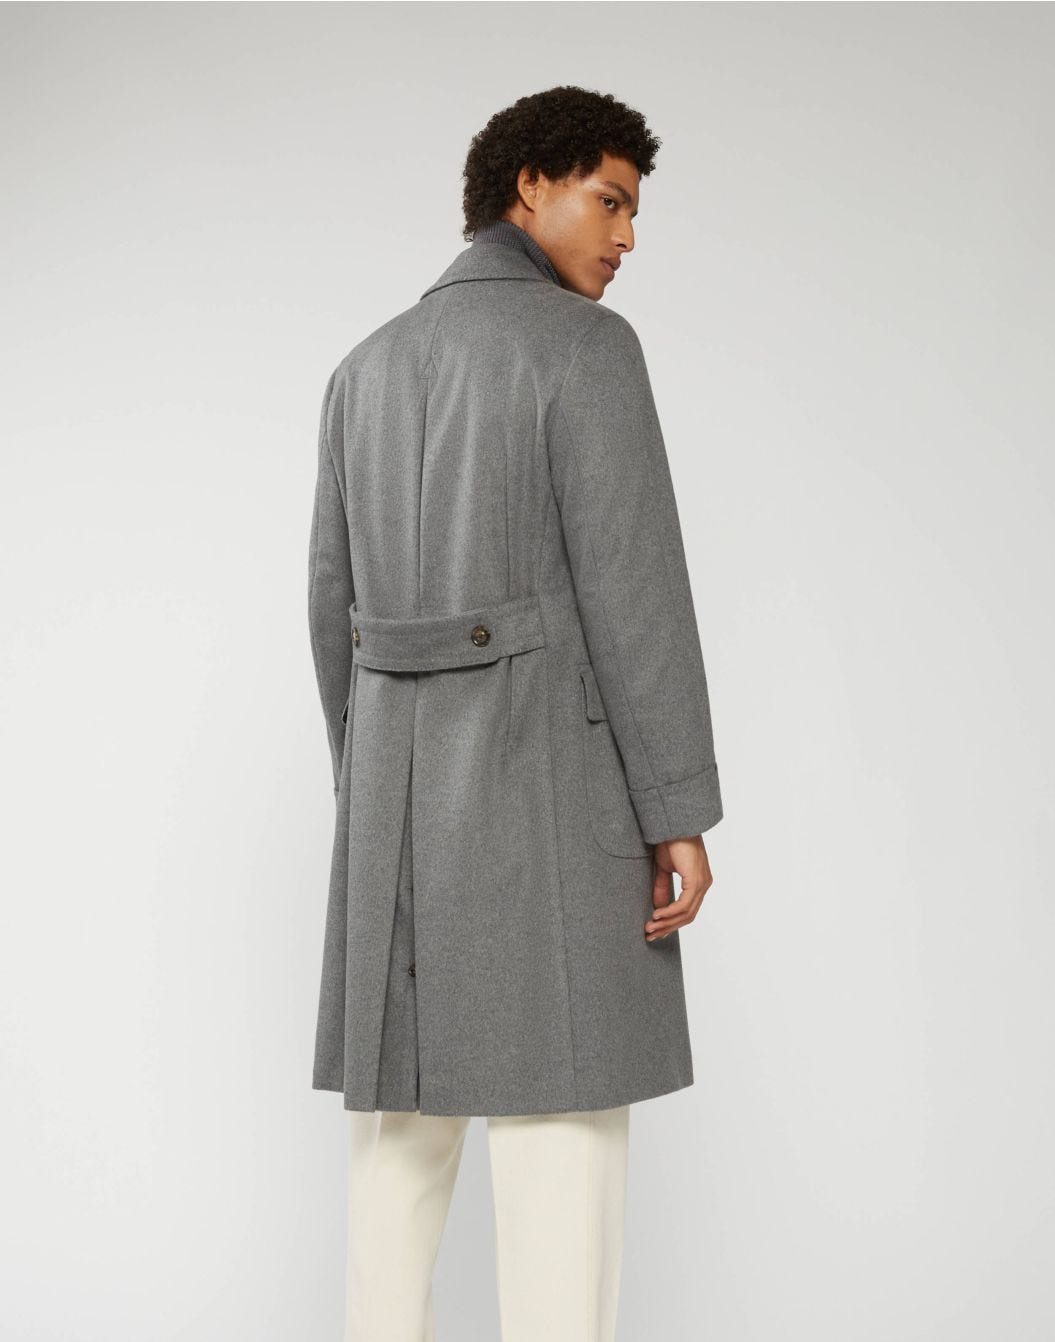 Double-breasted Ulster coat with martingale in black cashmere